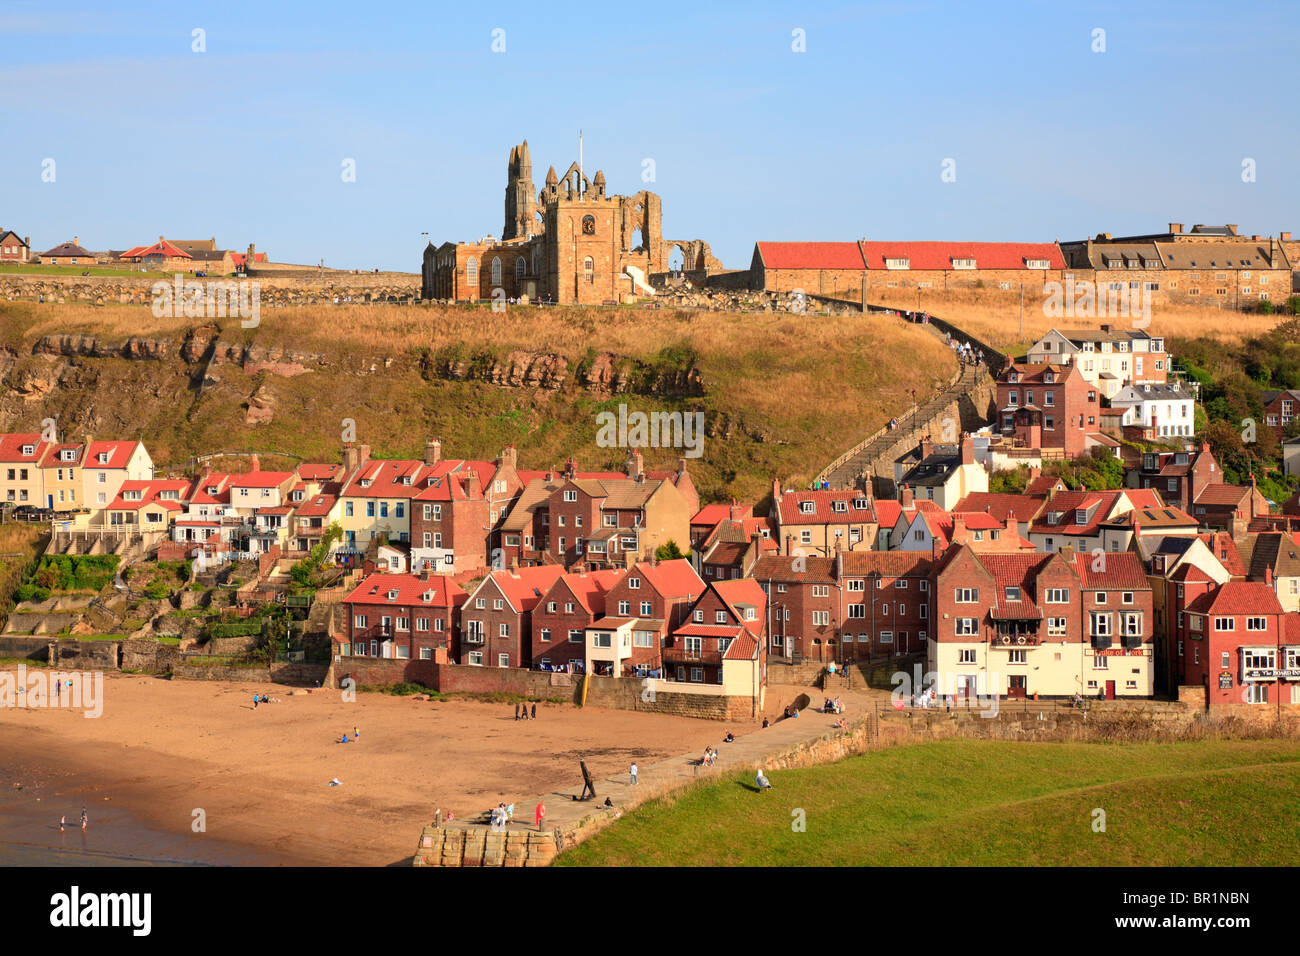 St Mary's Church and Whitby Abbey on East Cliff above Fishermen's cottages and Lower Harbour, Whitby, North Yorkshire, England, UK. Stock Photo